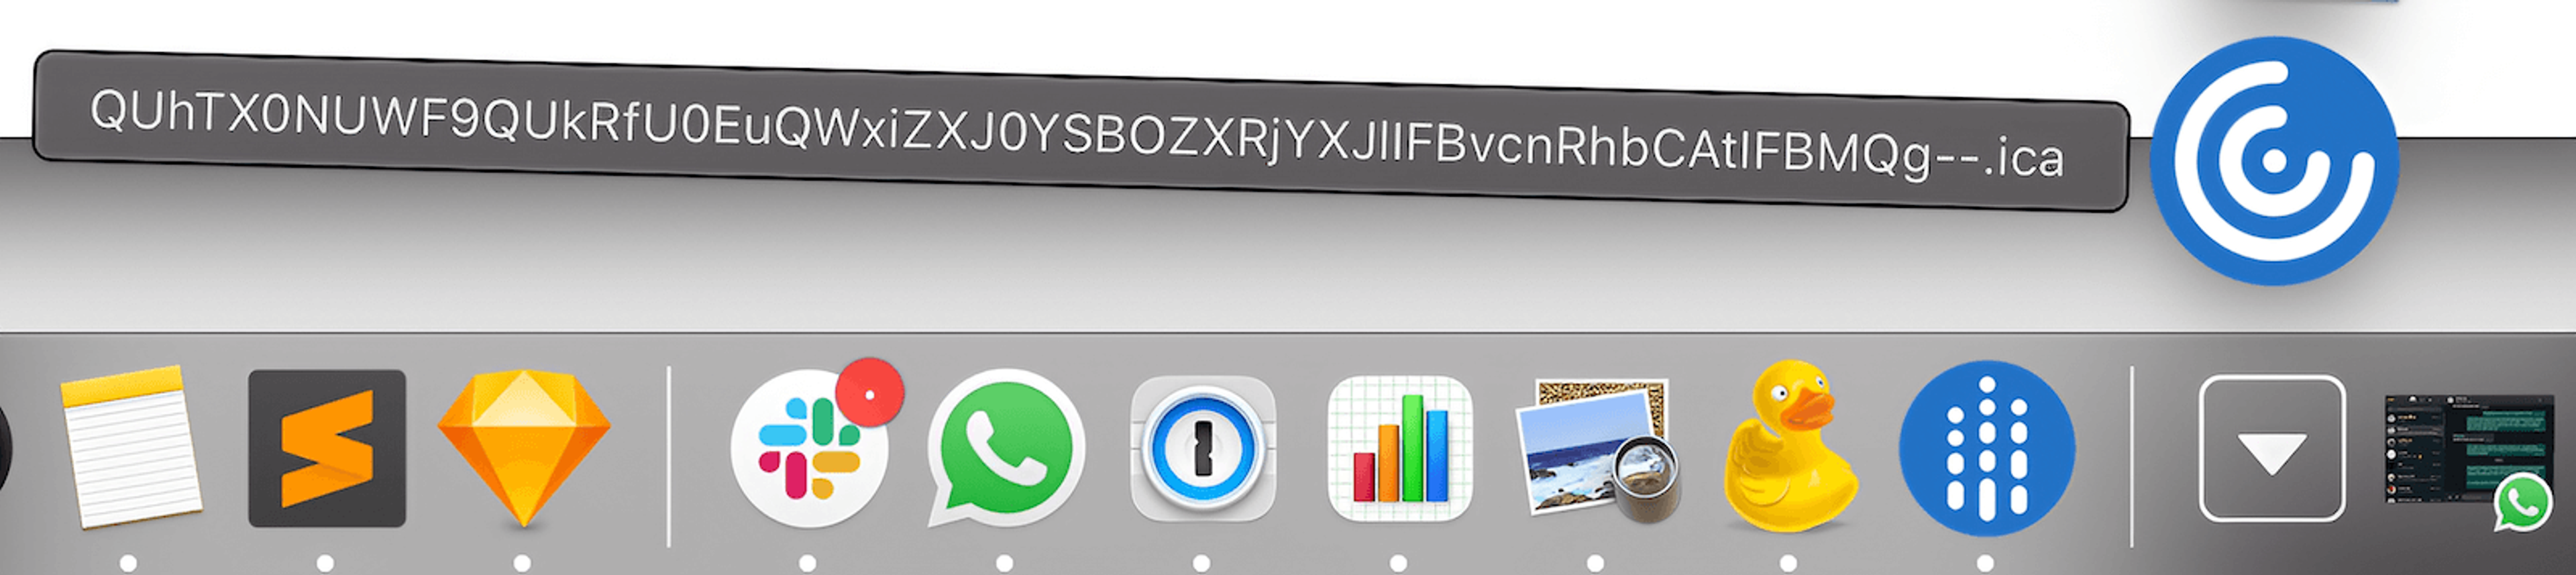 Mac icons below a downloaded .ica file